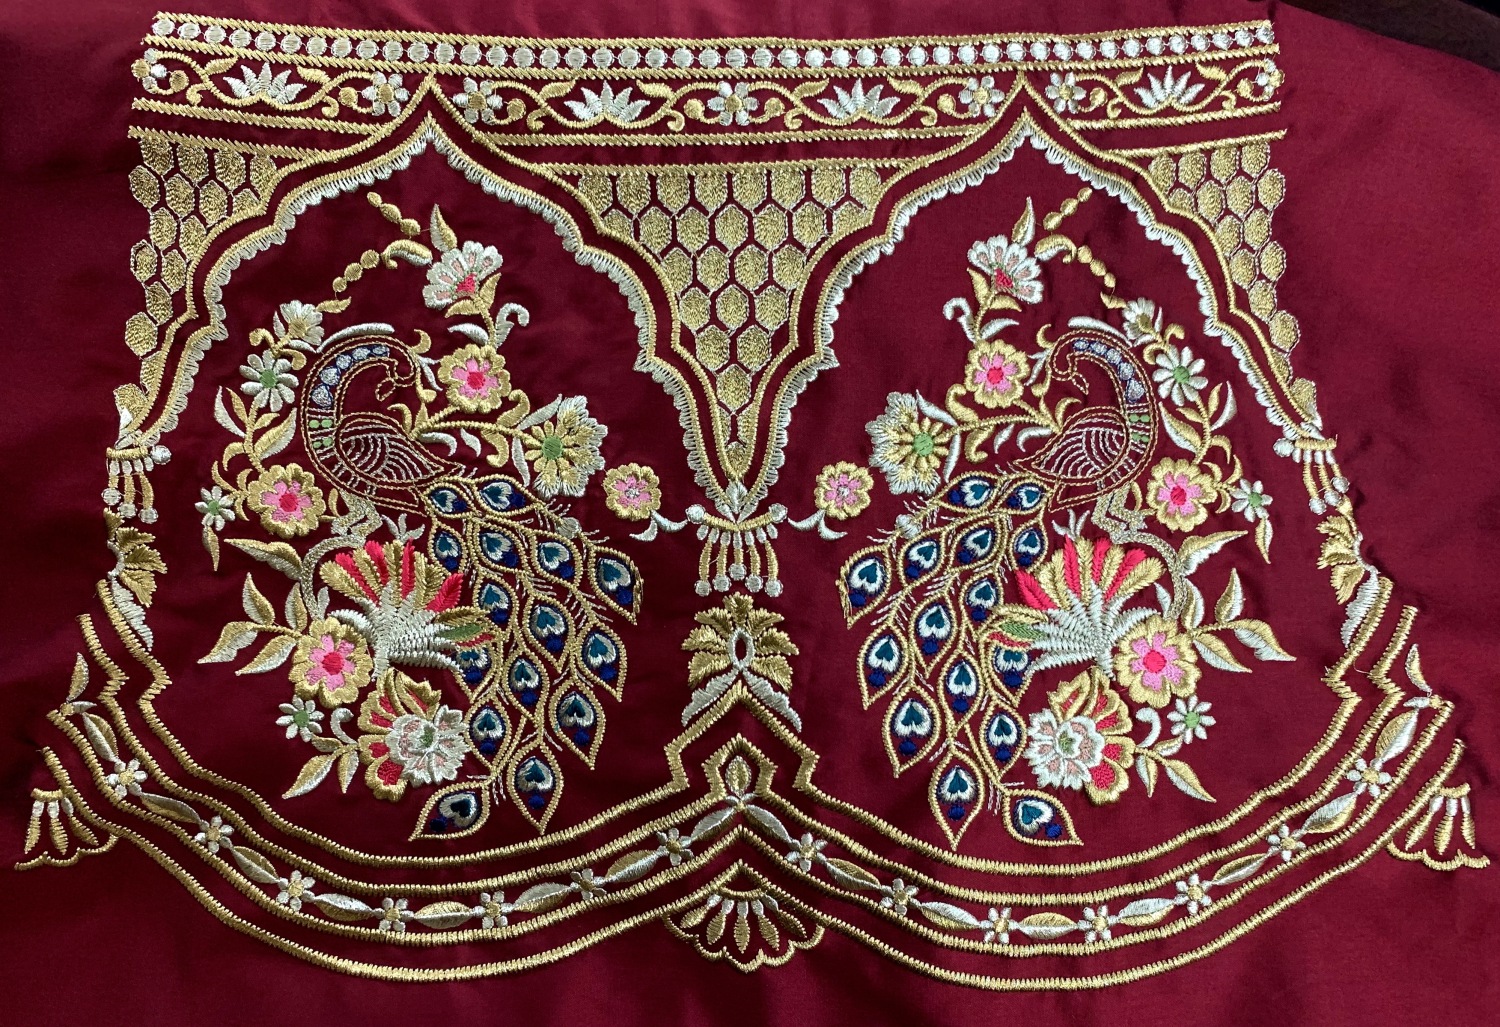 ALOK JAIN – Embroidery and Value Additions